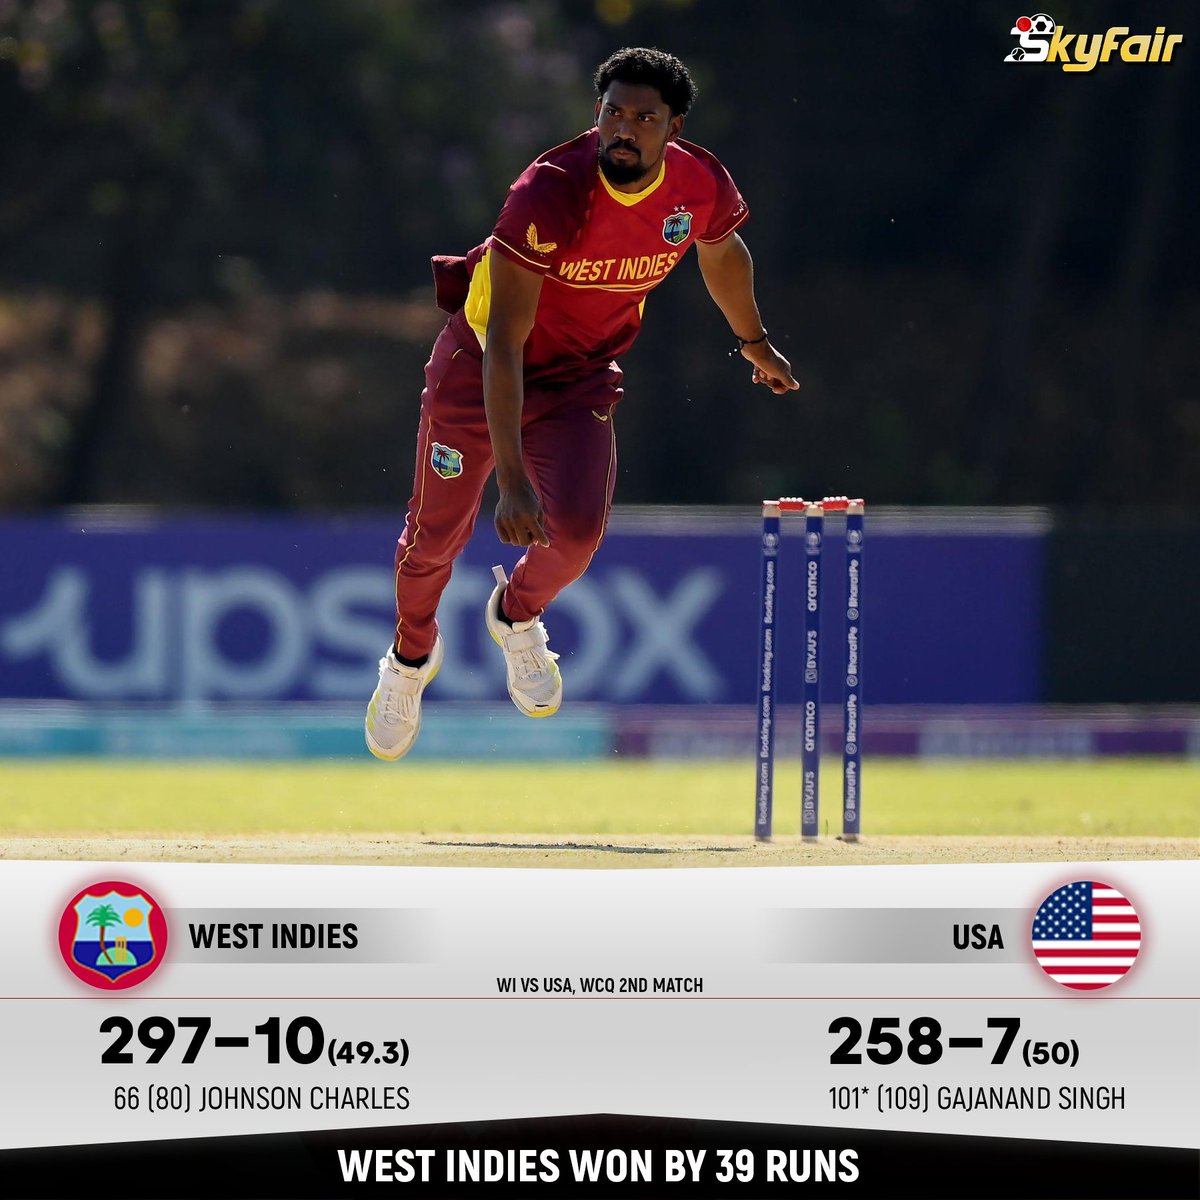 An unbeaten century from USA's Gajanand Singh, but West Indies had enough on the board to win the qualifier today.

#WCQualifiers #ODI #WorldCup #SeanWilliams #CraigErvin #ZIMvNEP #Skyfair